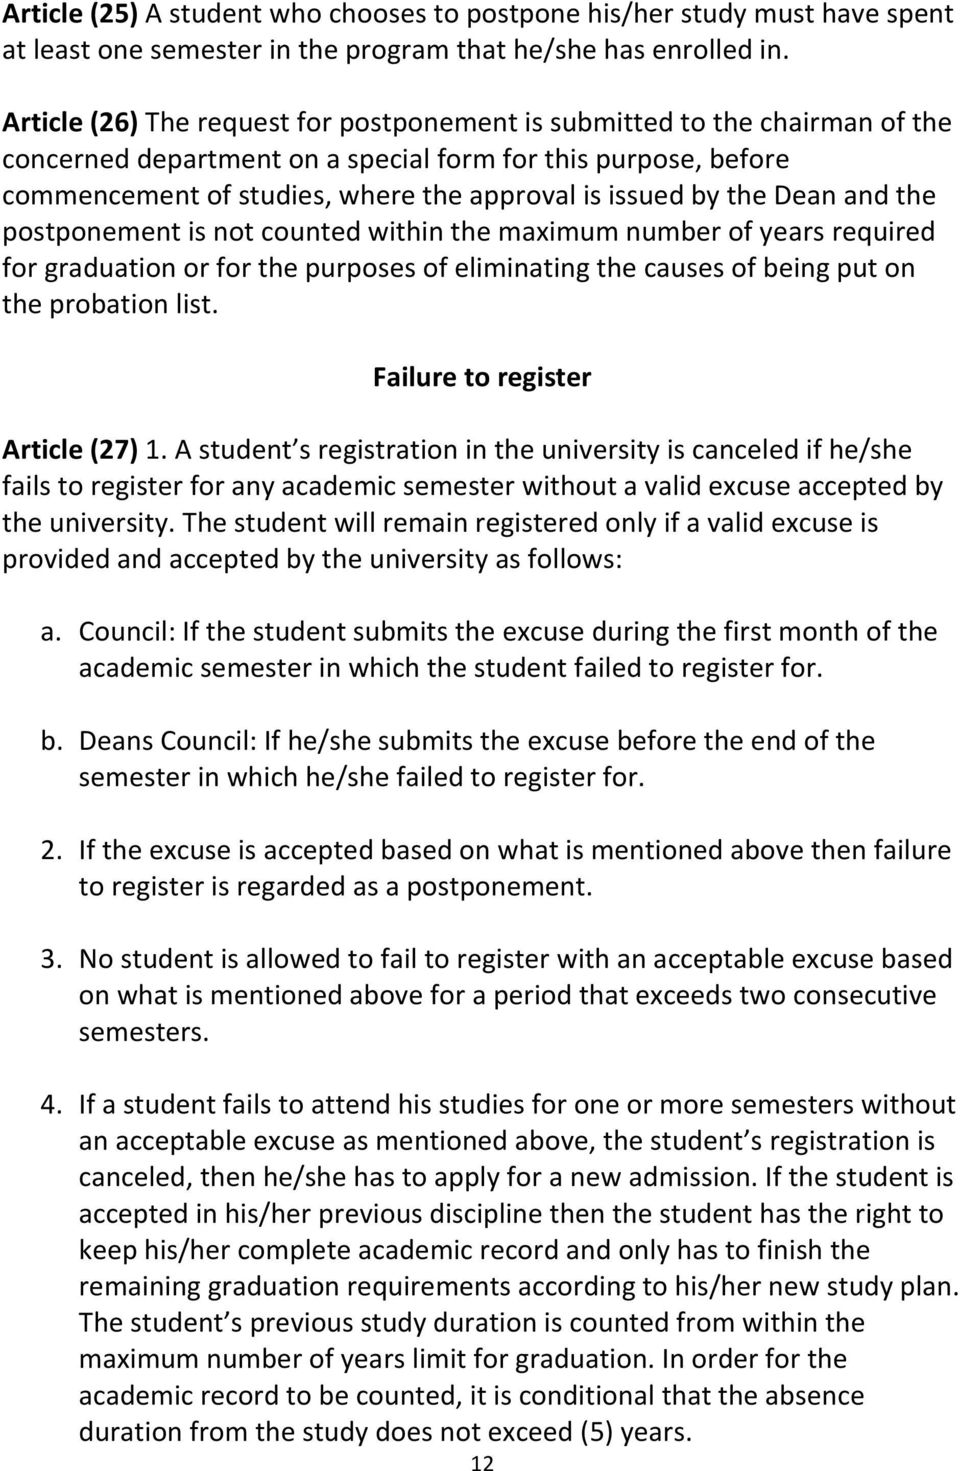 the Dean and the postponement is not counted within the maximum number of years required for graduation or for the purposes of eliminating the causes of being put on the probation list.